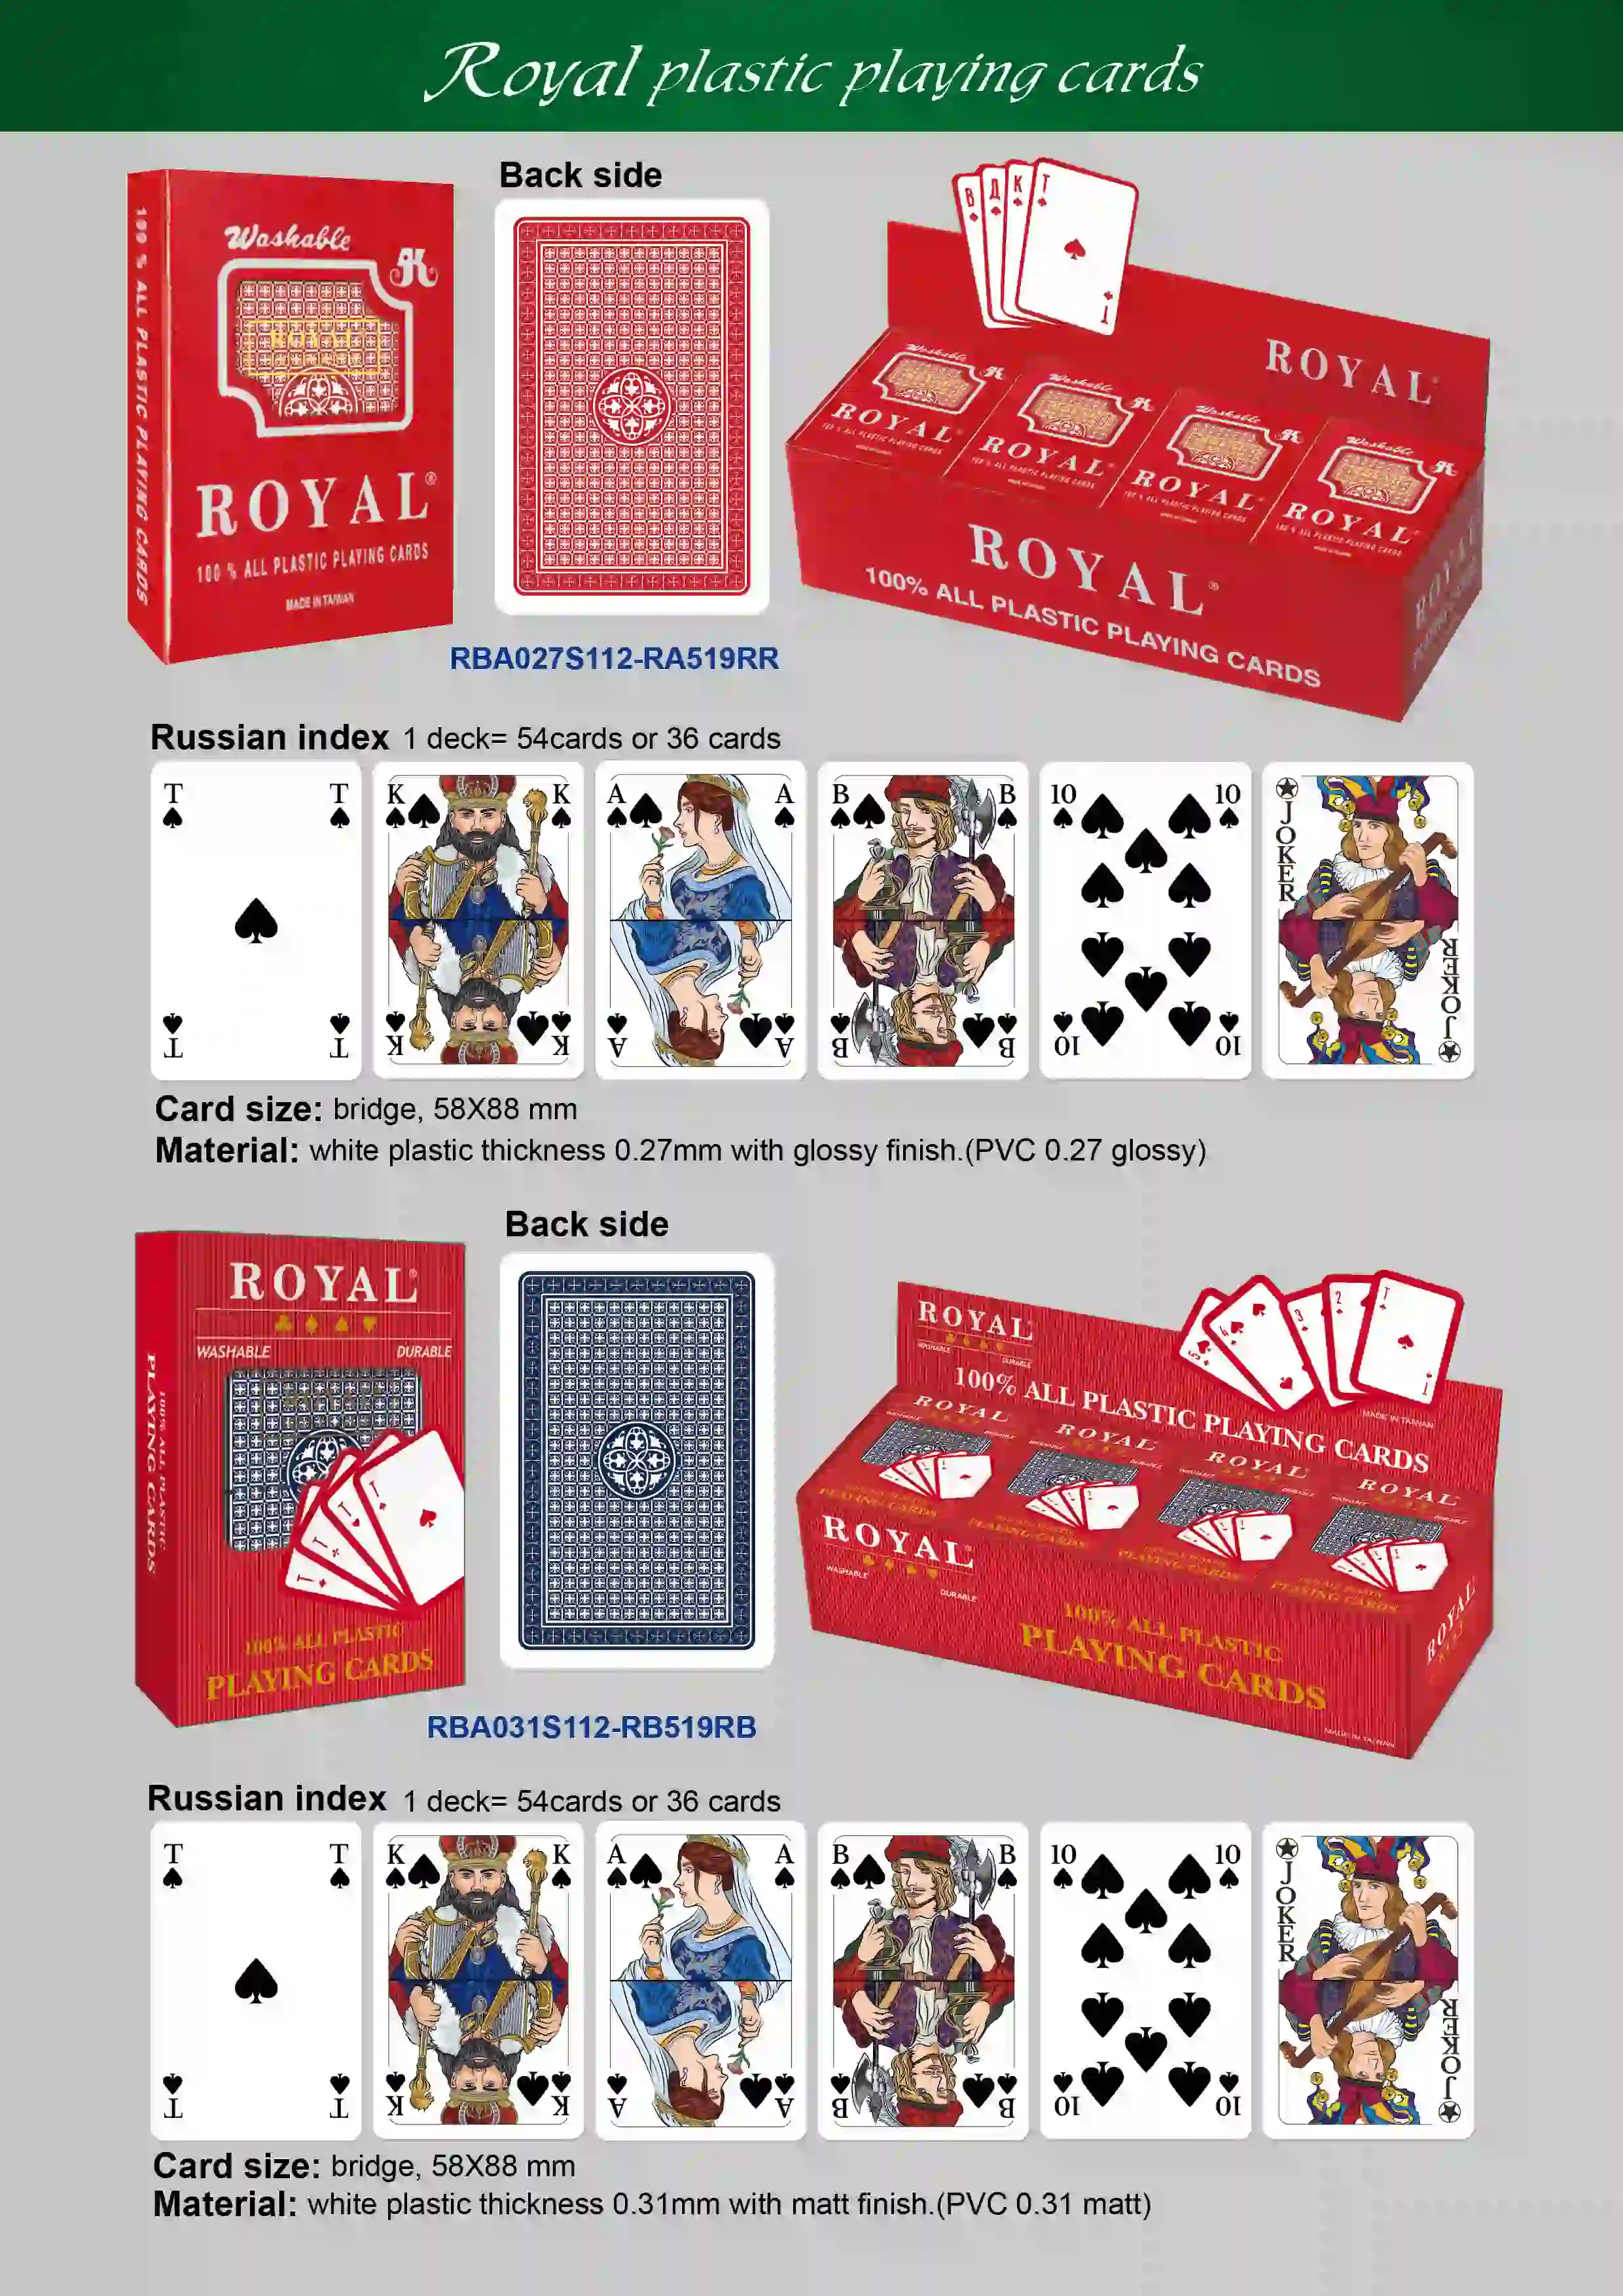 ROYAL Plastic Playing Cards - Russian Index